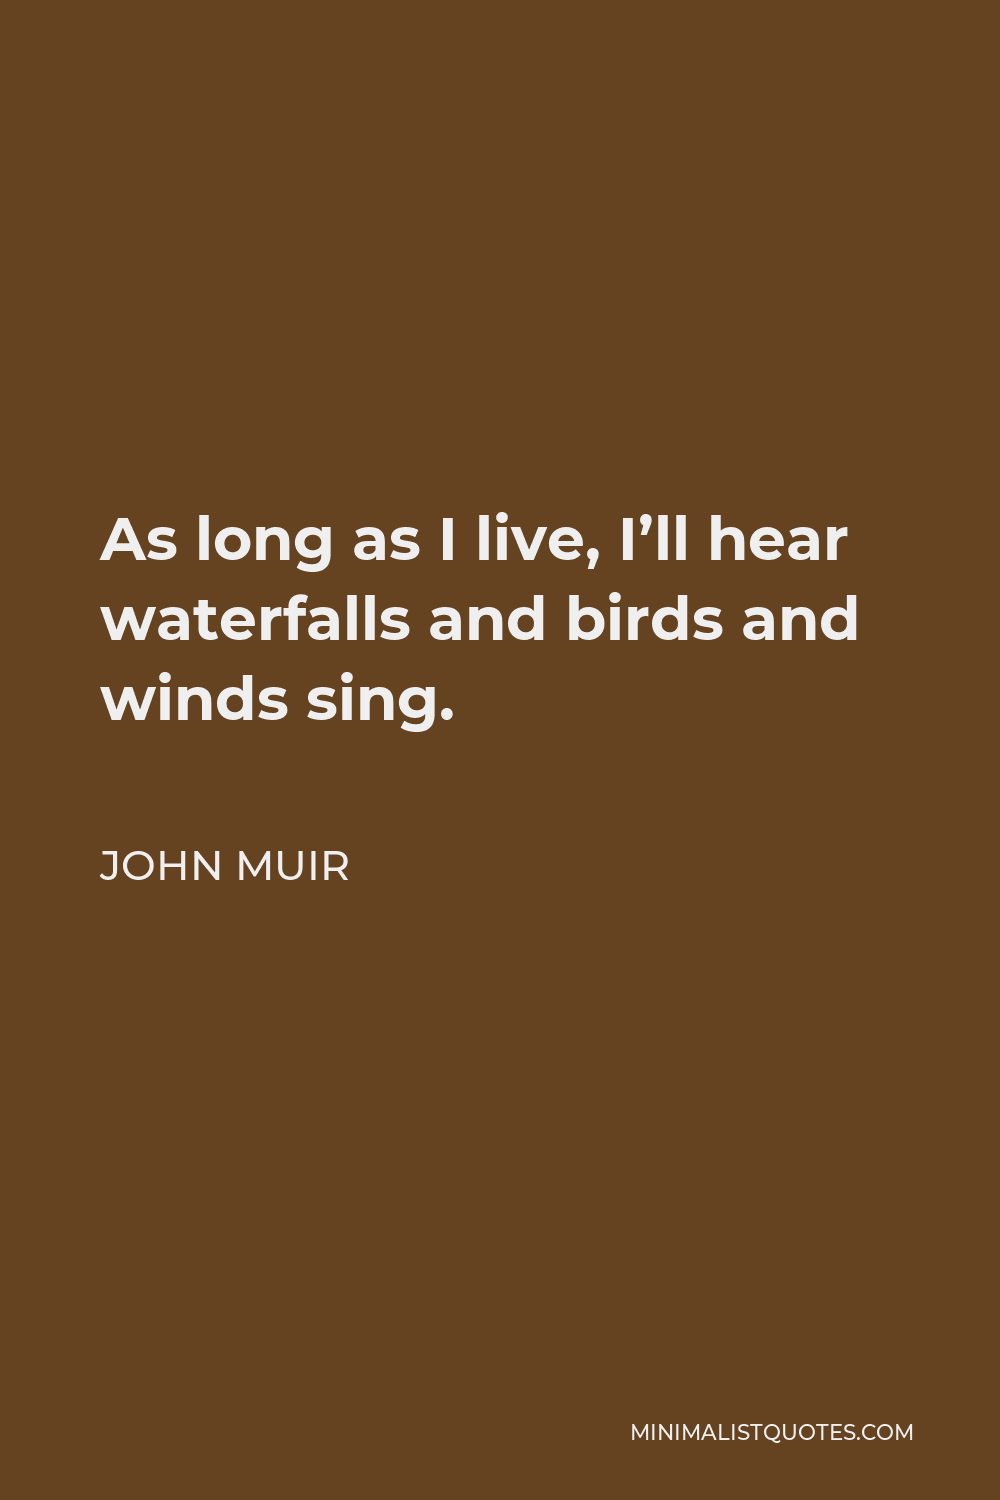 John Muir Quote - As long as I live, I’ll hear waterfalls and birds and winds sing.